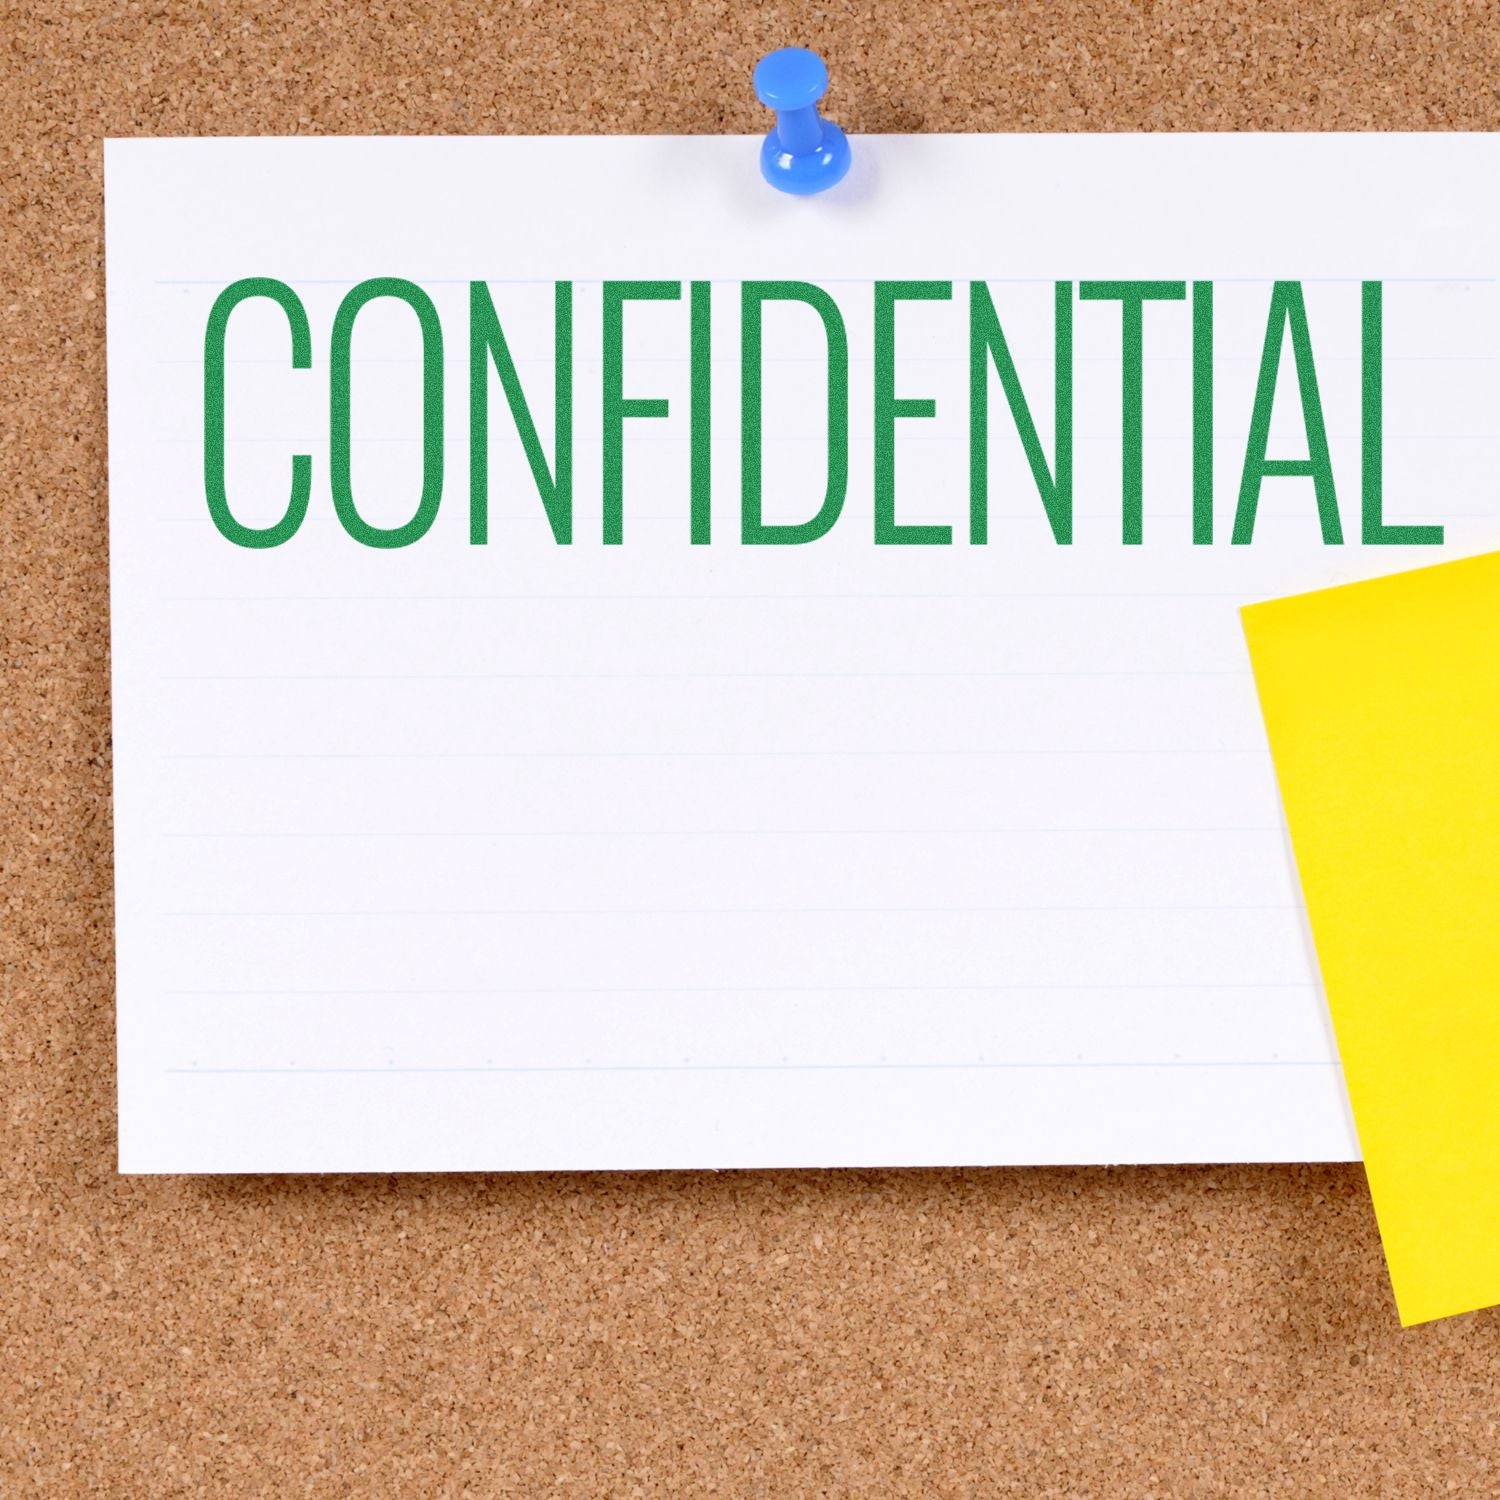 Large Self-Inking Narrow Font Confidential Stamp In Use